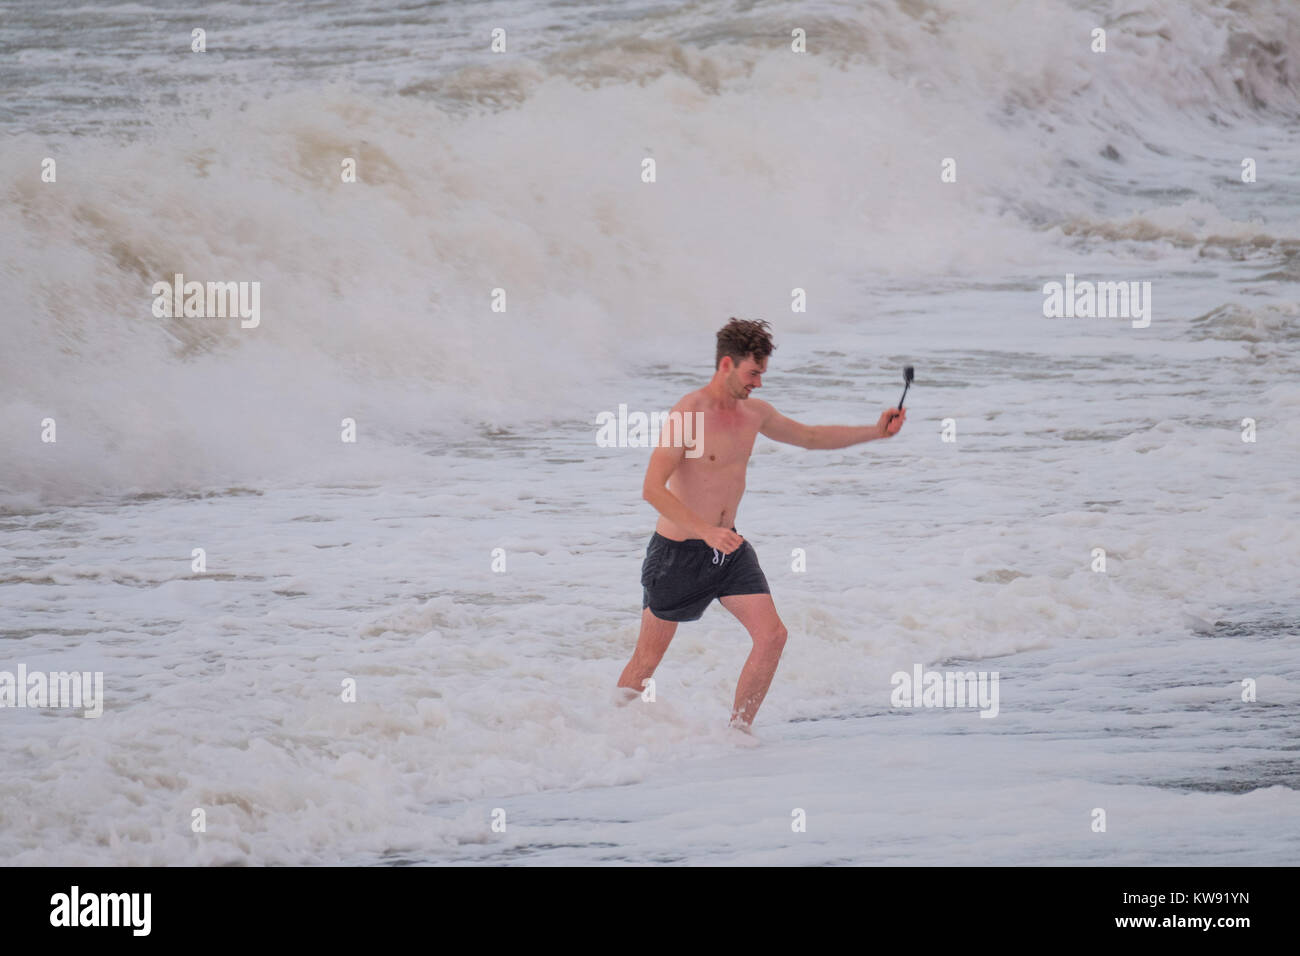 Aberystwyth Wales UK New Years Day, Monday 01 January 2018 UK Weather: On the first day of the New Year, January 1 2018, a man braves the strong winds and the icy cold water in the sea in Aberystwyth to take a selfie. The weather is set to deteriorate over the next 48 hours, with winds gusting in excess of 50mph on Tuesday night and Wednesday morning photo Credit: Keith Morris/Alamy Live News Stock Photo